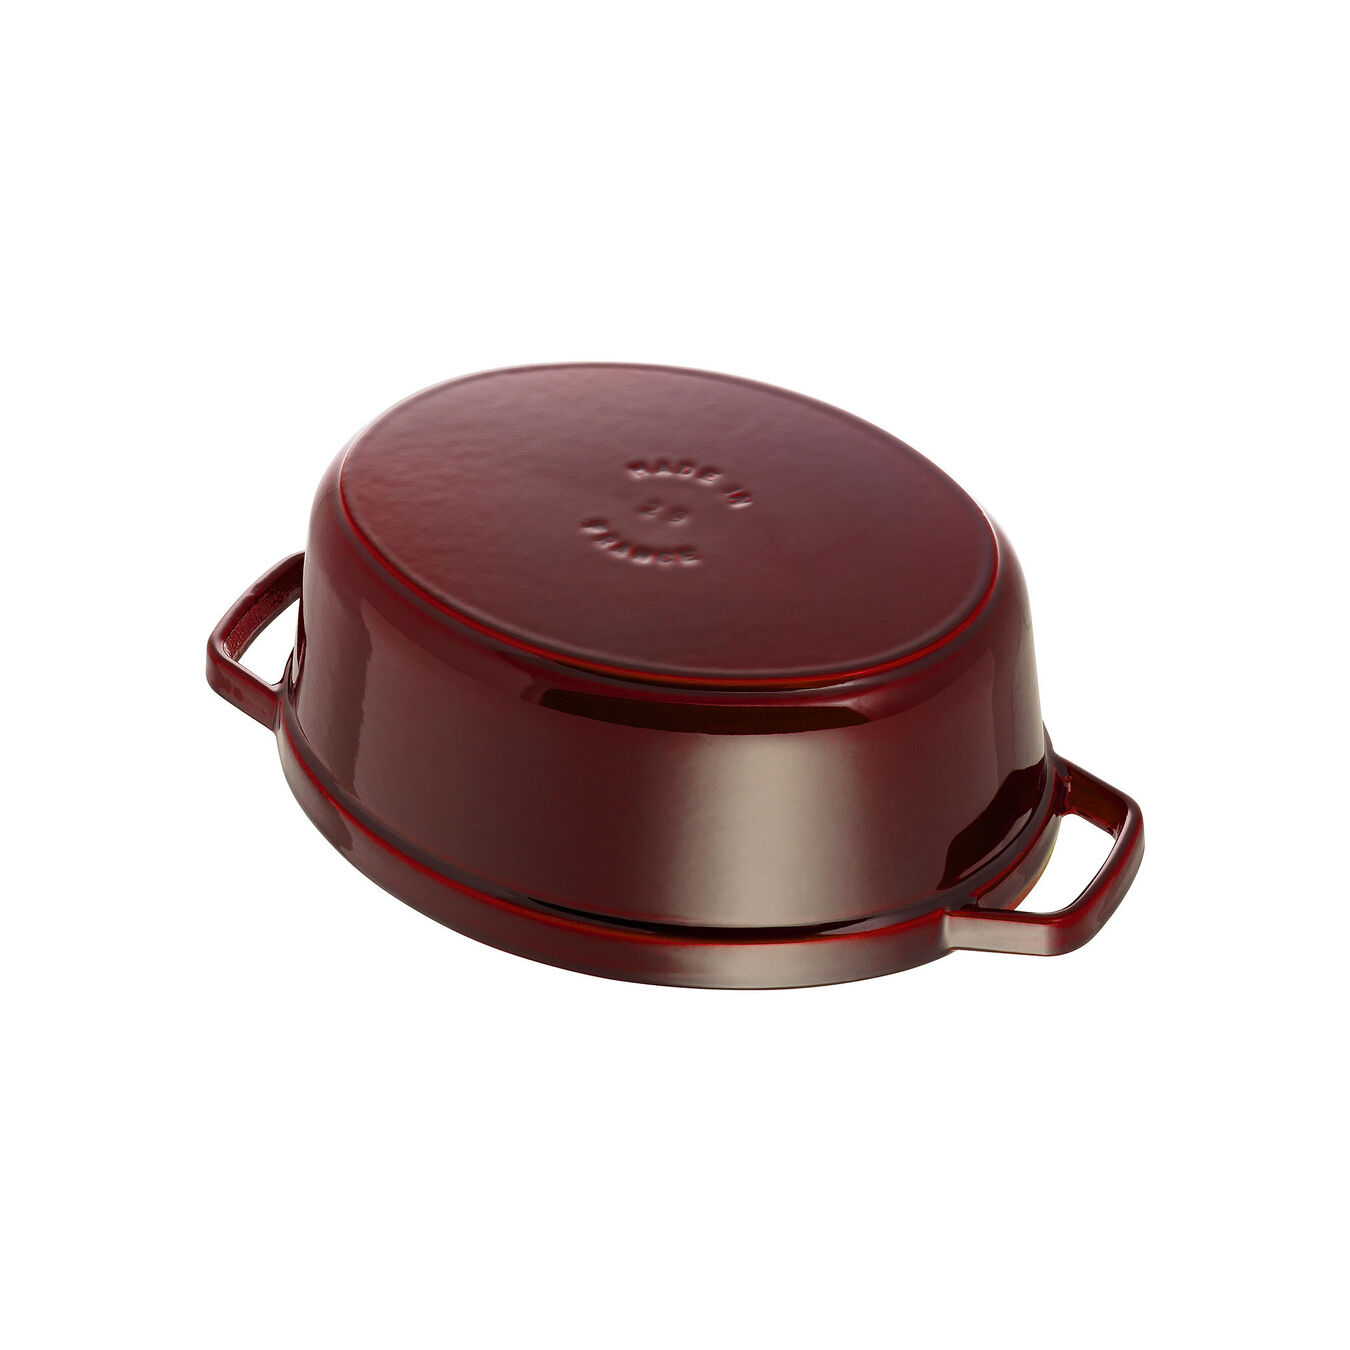 4.25 l cast iron oval Cocotte, grenadine-red,,large 4